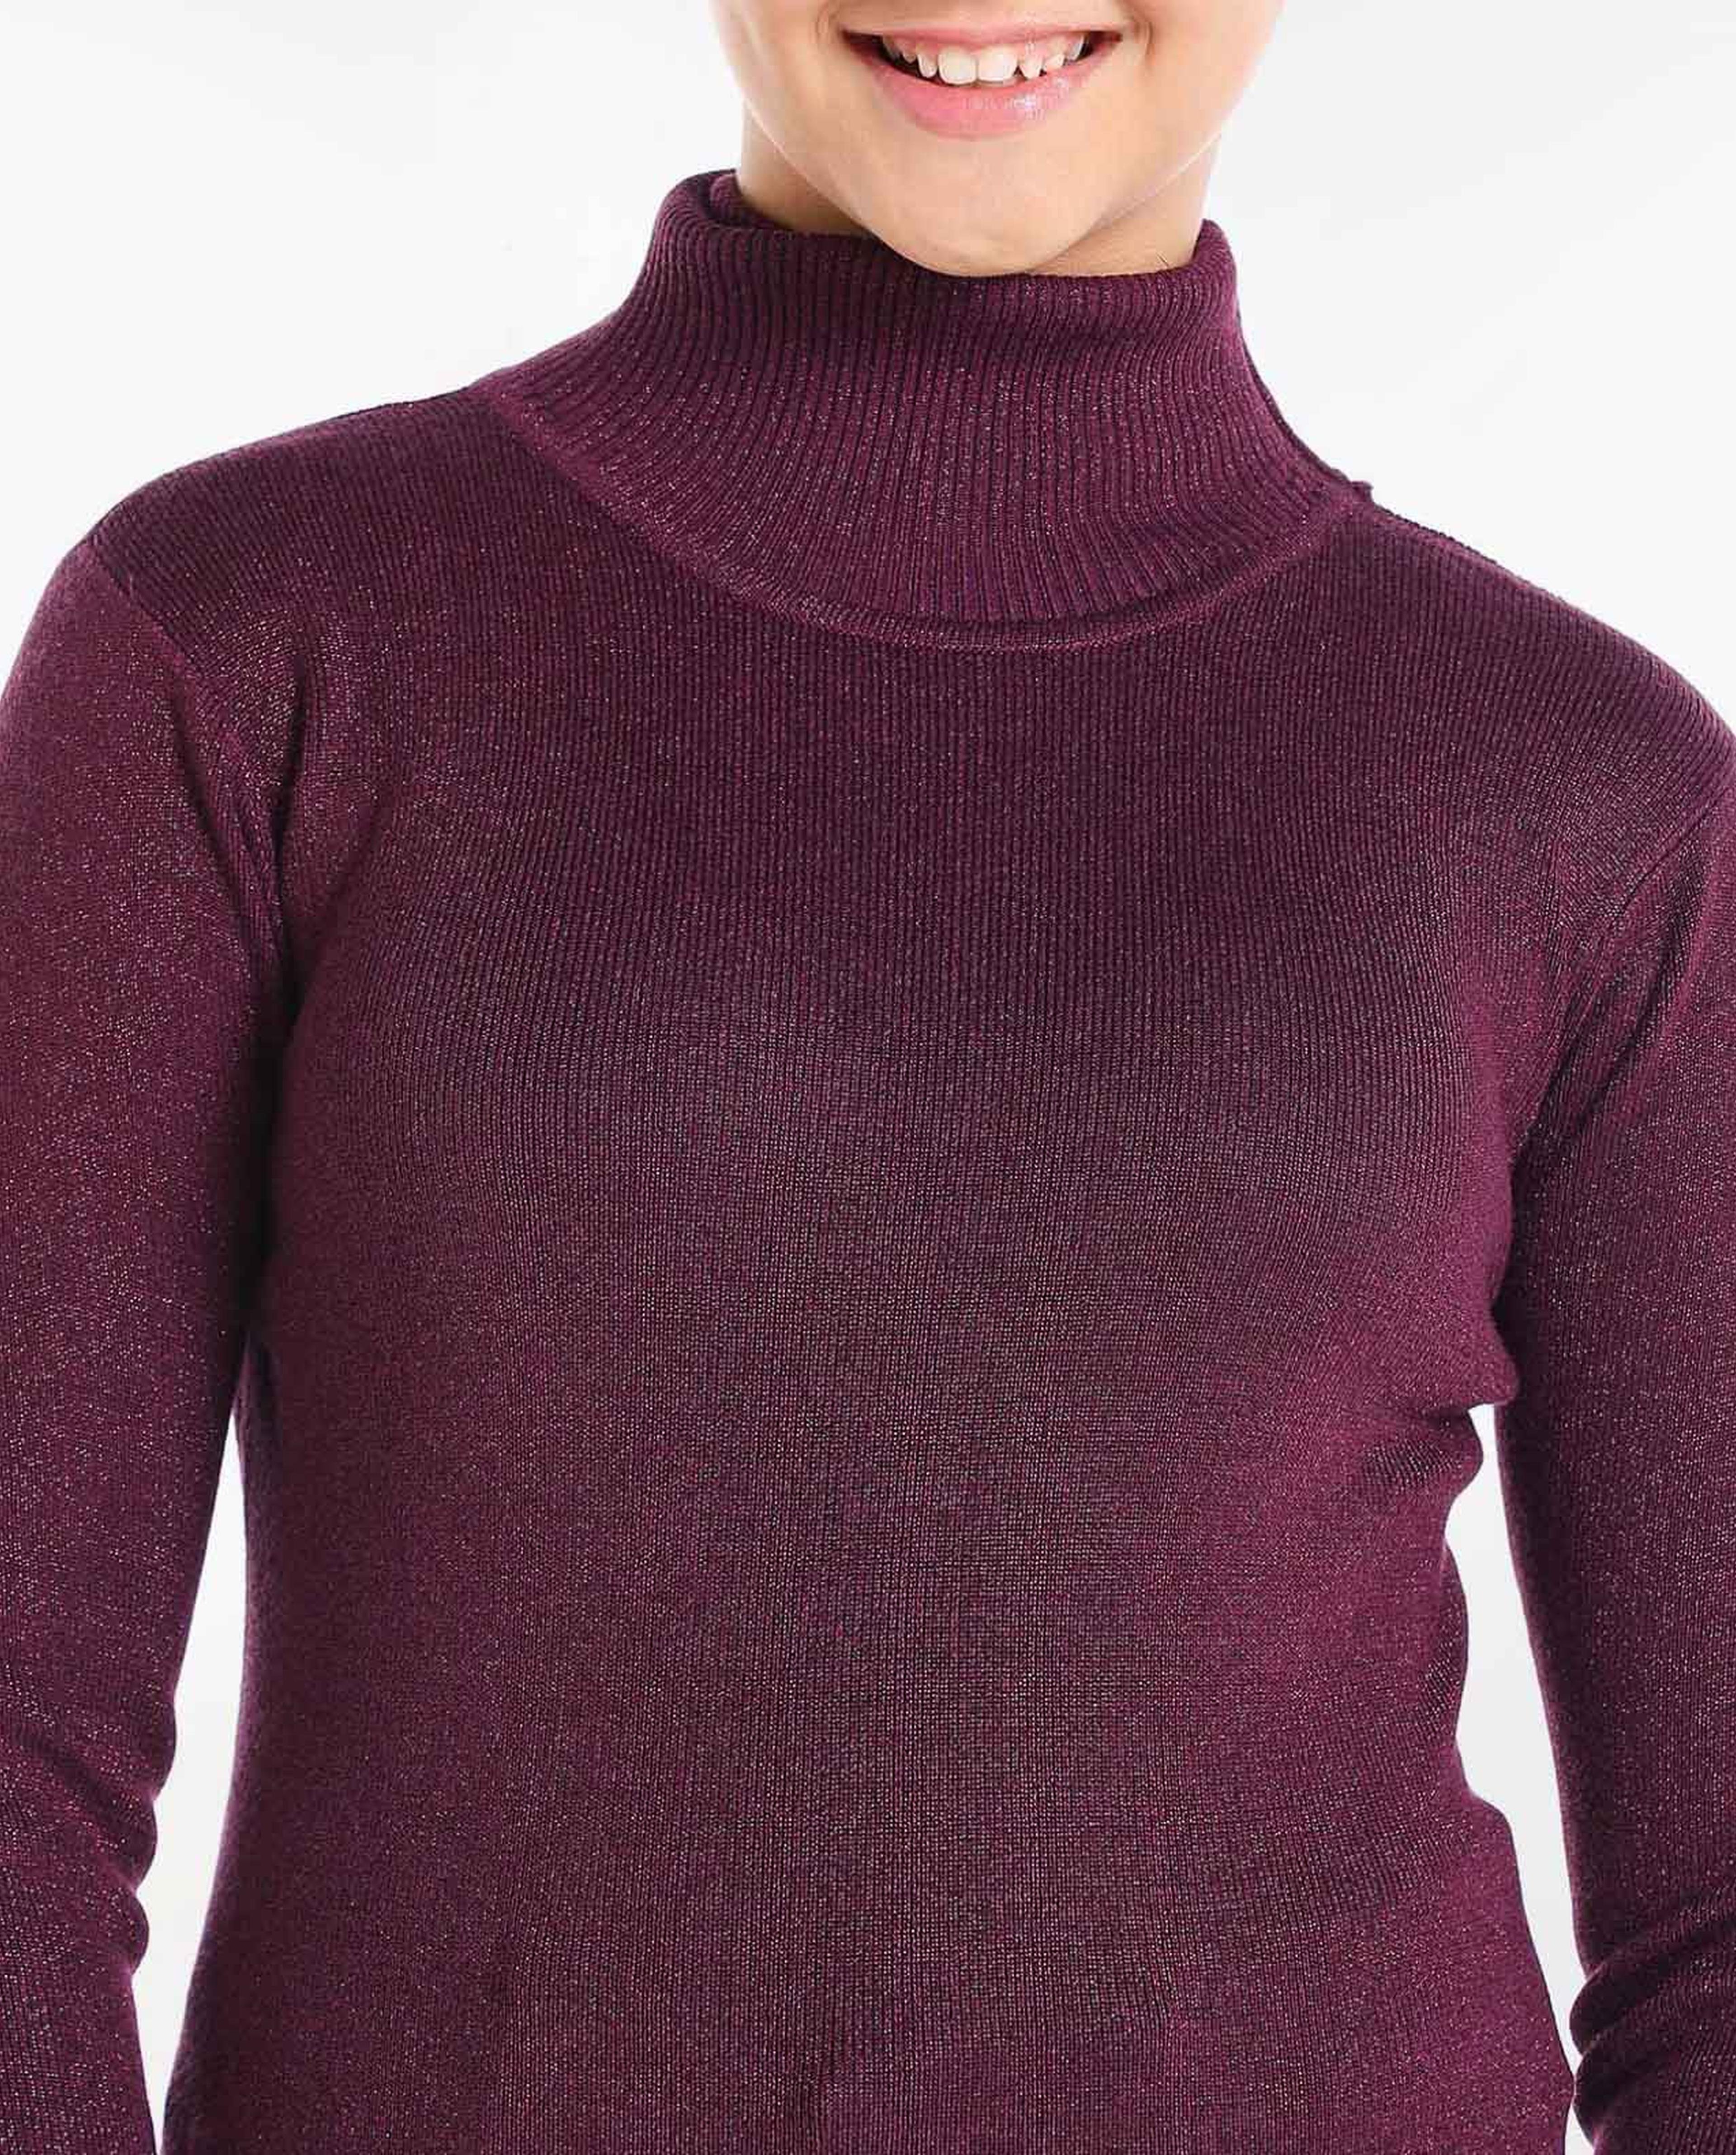 Solid Sweatshirt with Turtle Neck and Long Sleeves